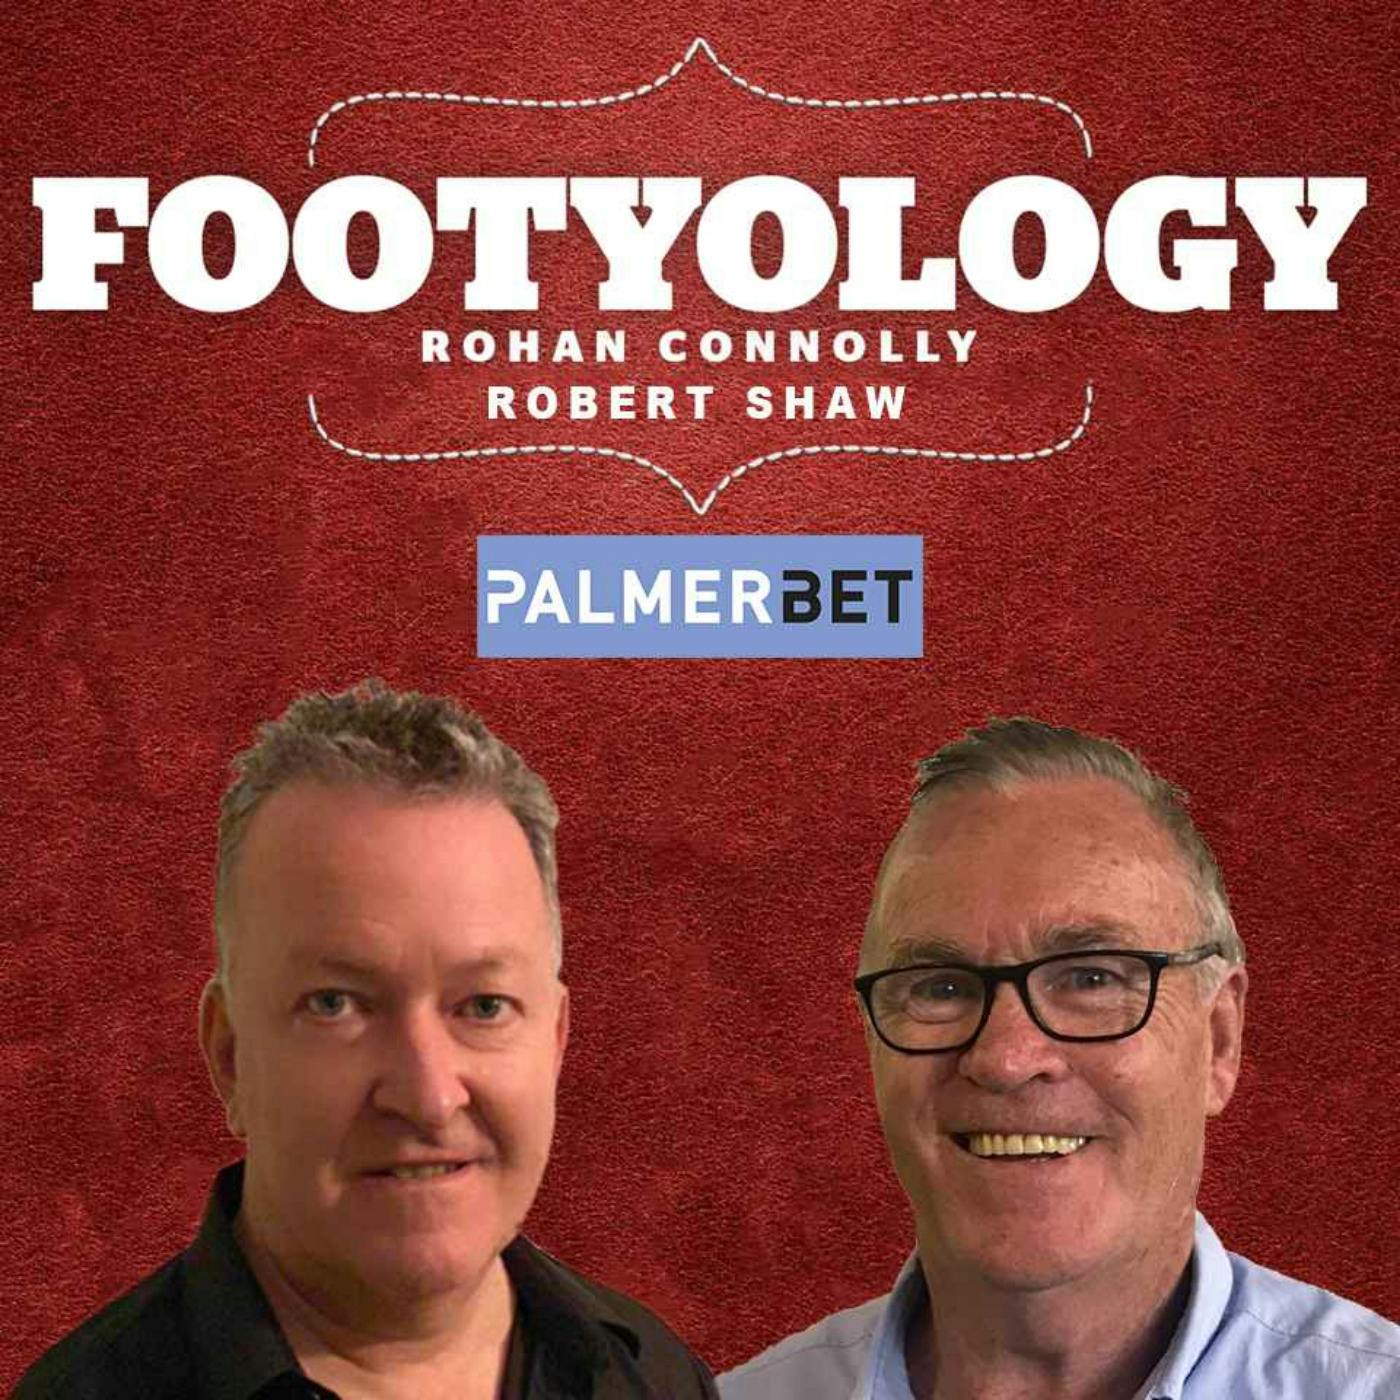 Footyology Podcast - August 7th 2022